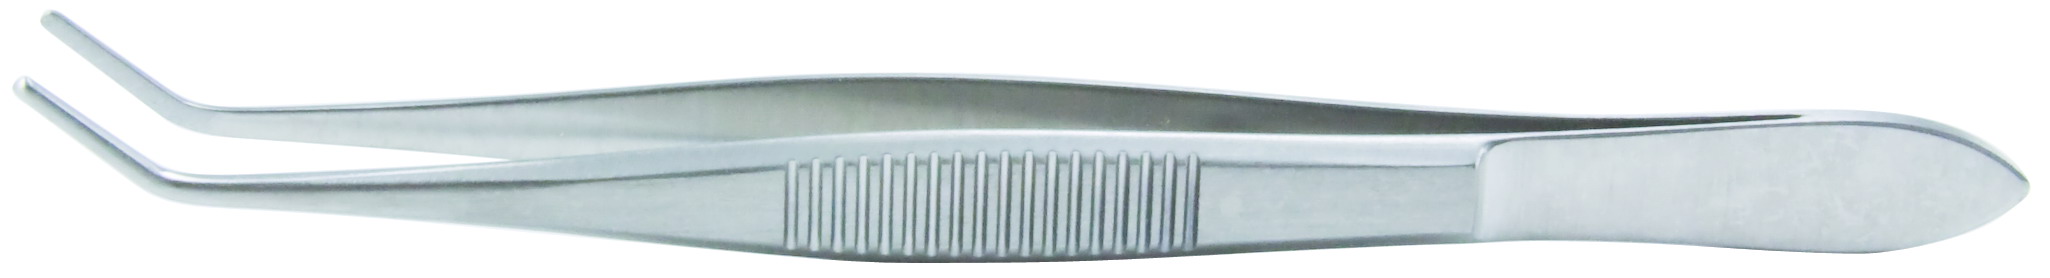 nugent-utility-forceps-4-1-4-108-cm-smooth-tips-1-x-2-mmwide-18-956-miltex.jpg